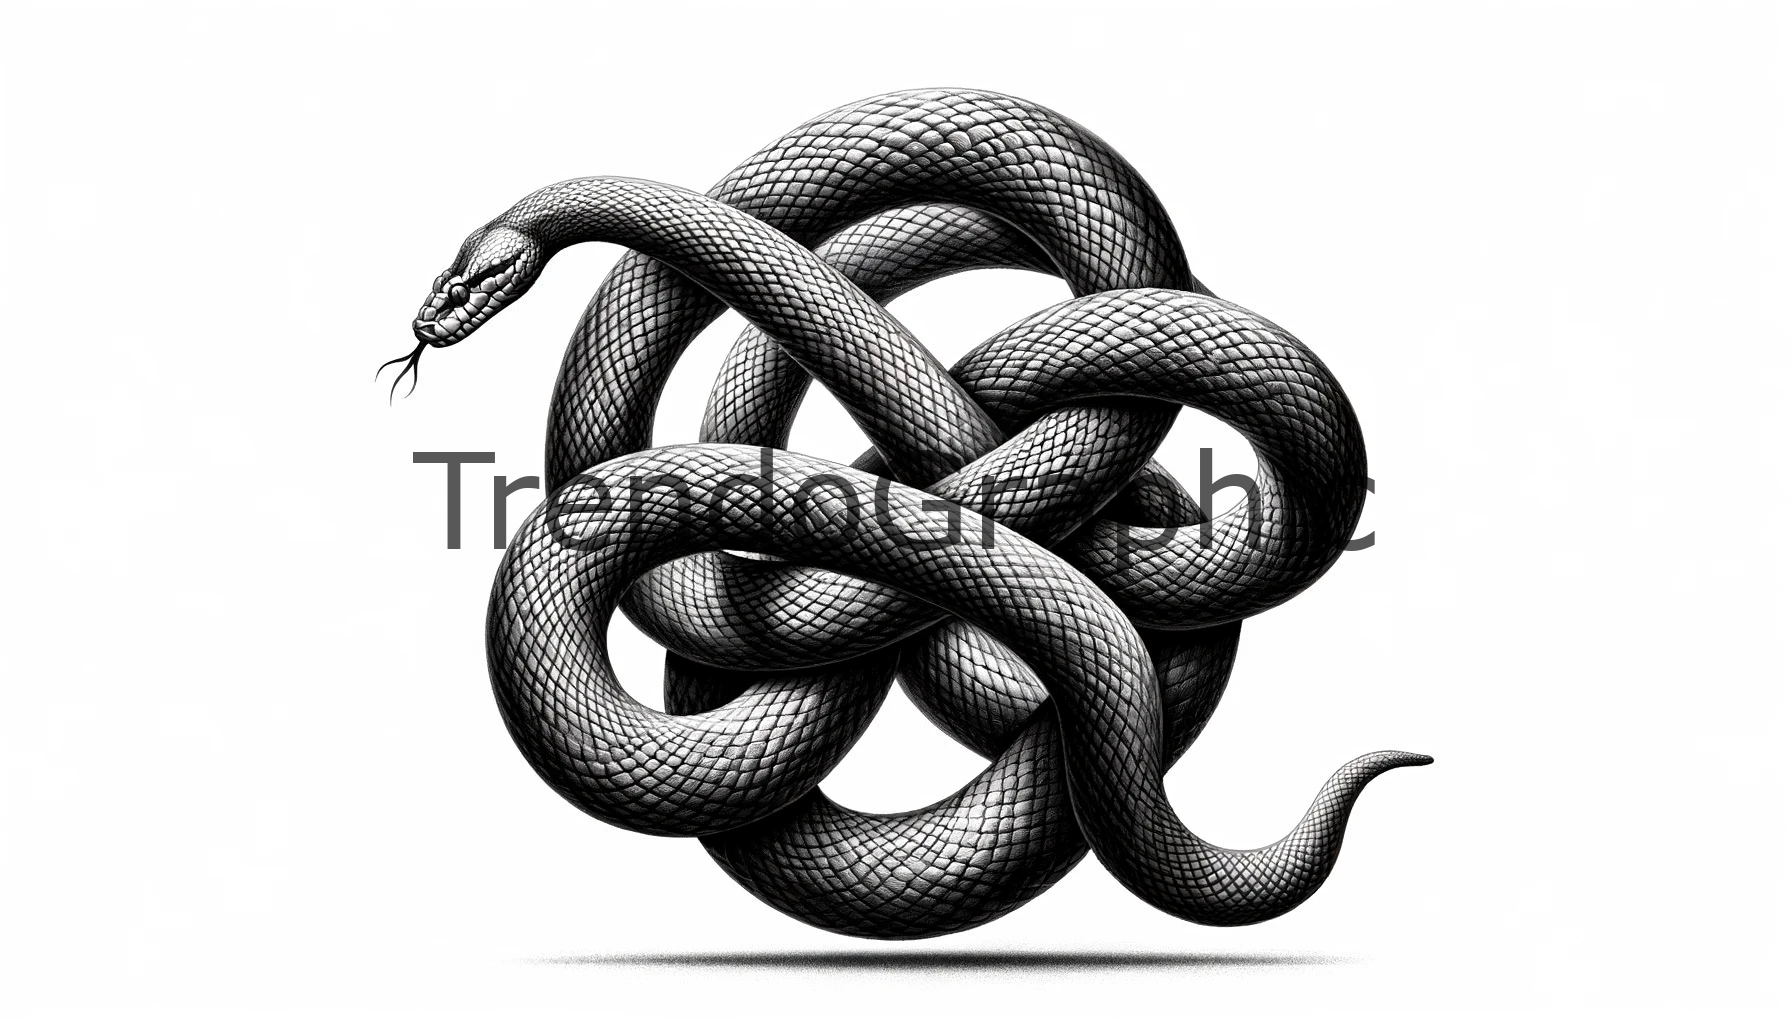 Serpentine Elegance: A Snake in an Intricate Knot